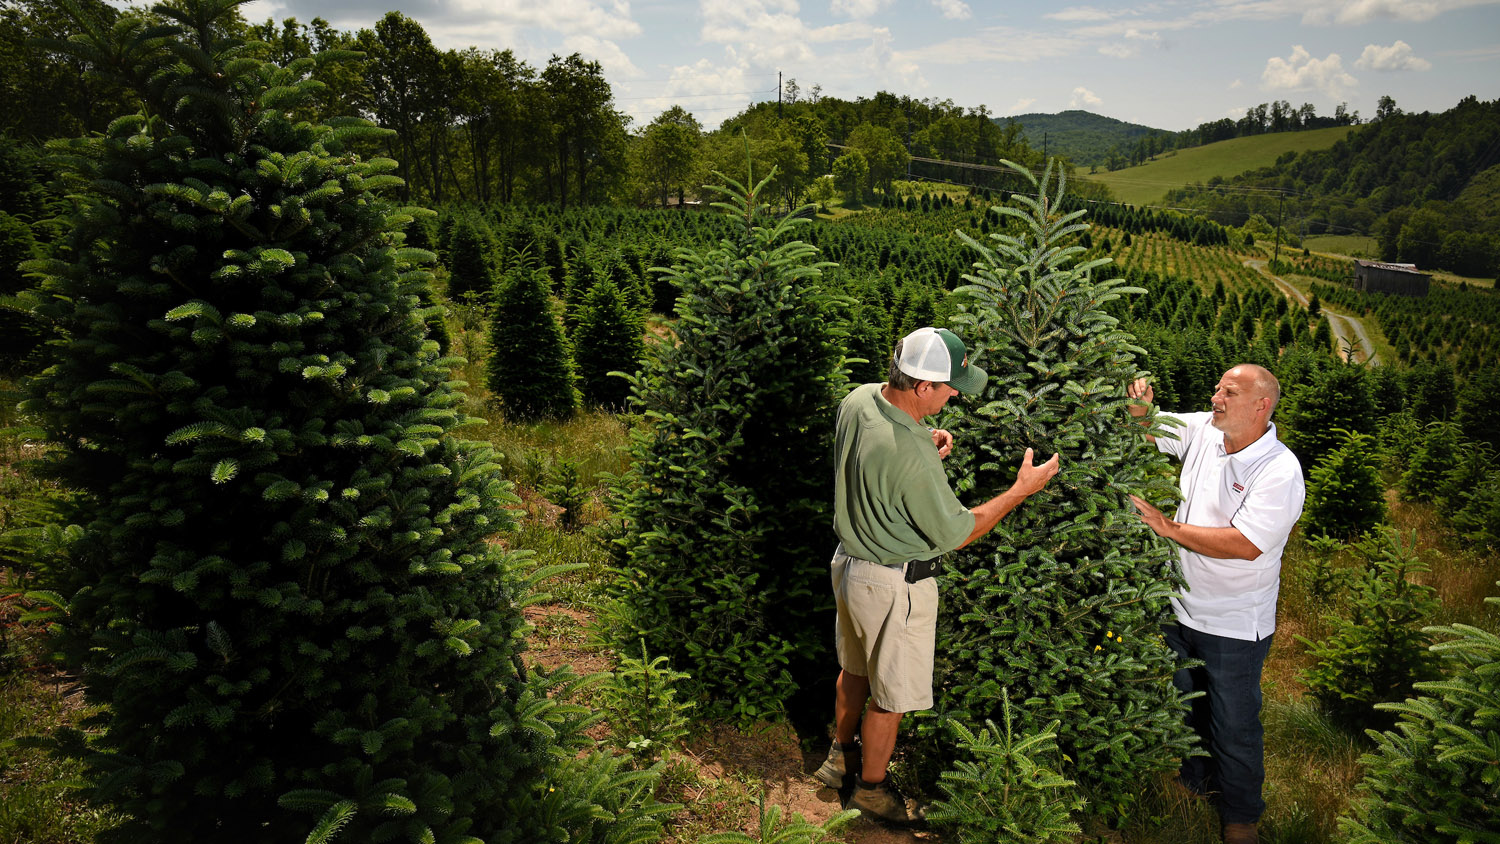 A farmer and Extension agent inspect a Christmas tree at a Christmas tree farm in the North Carolina mountains.